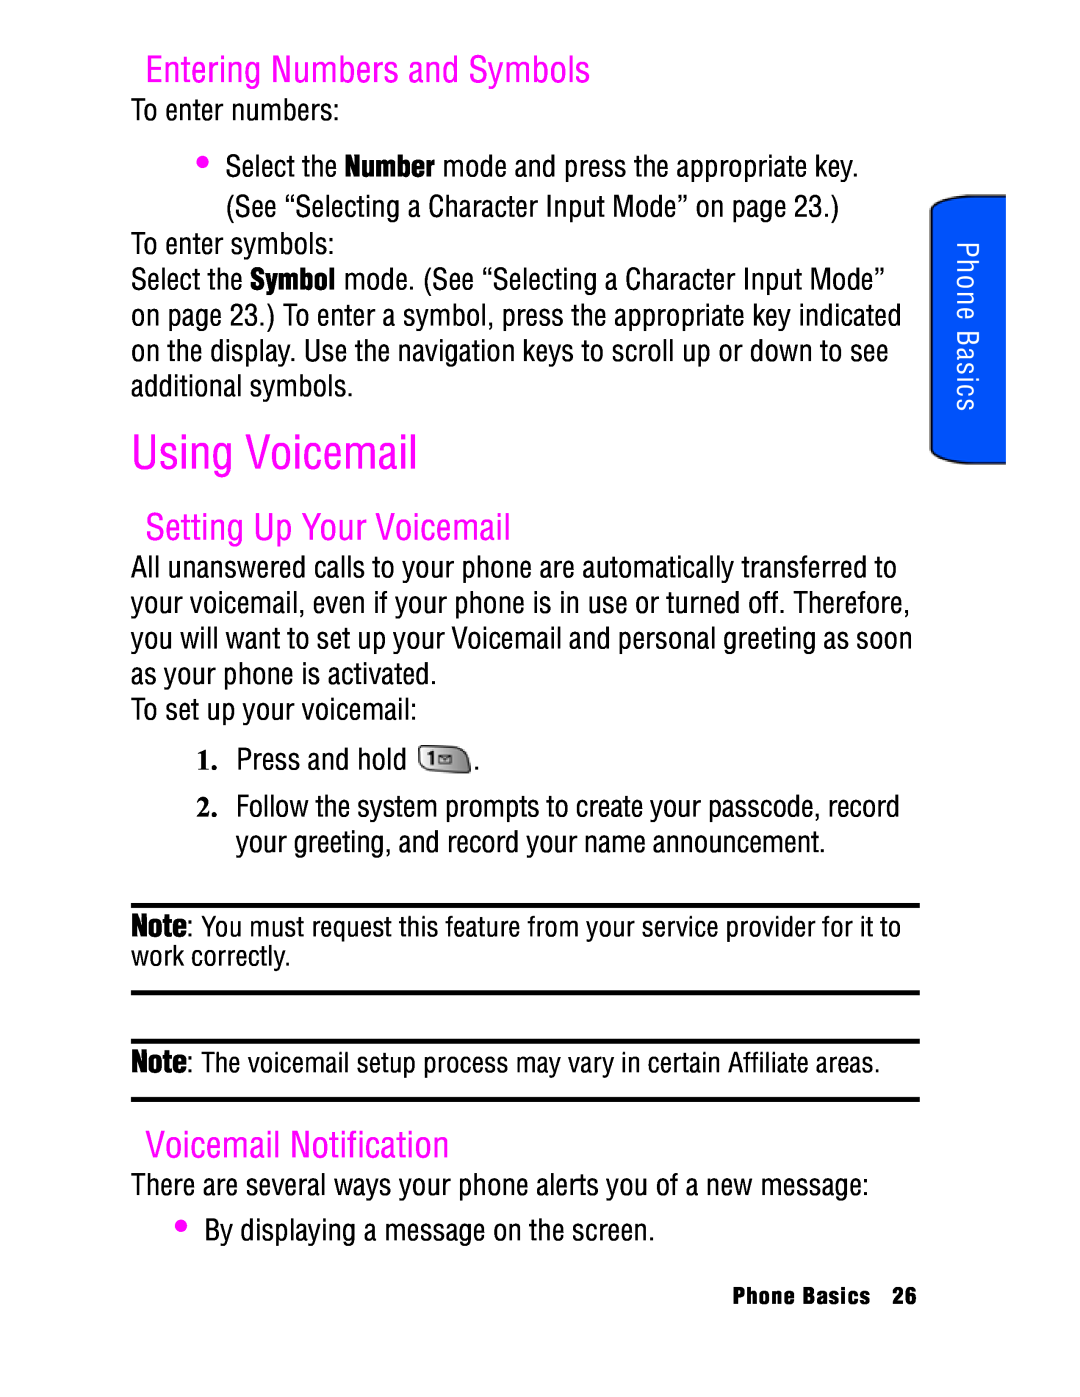 Samsung SPH-a740 manual Using Voicemail, Entering Numbers and Symbols, Setting Up Your Voicemail, Voicemail Notification 